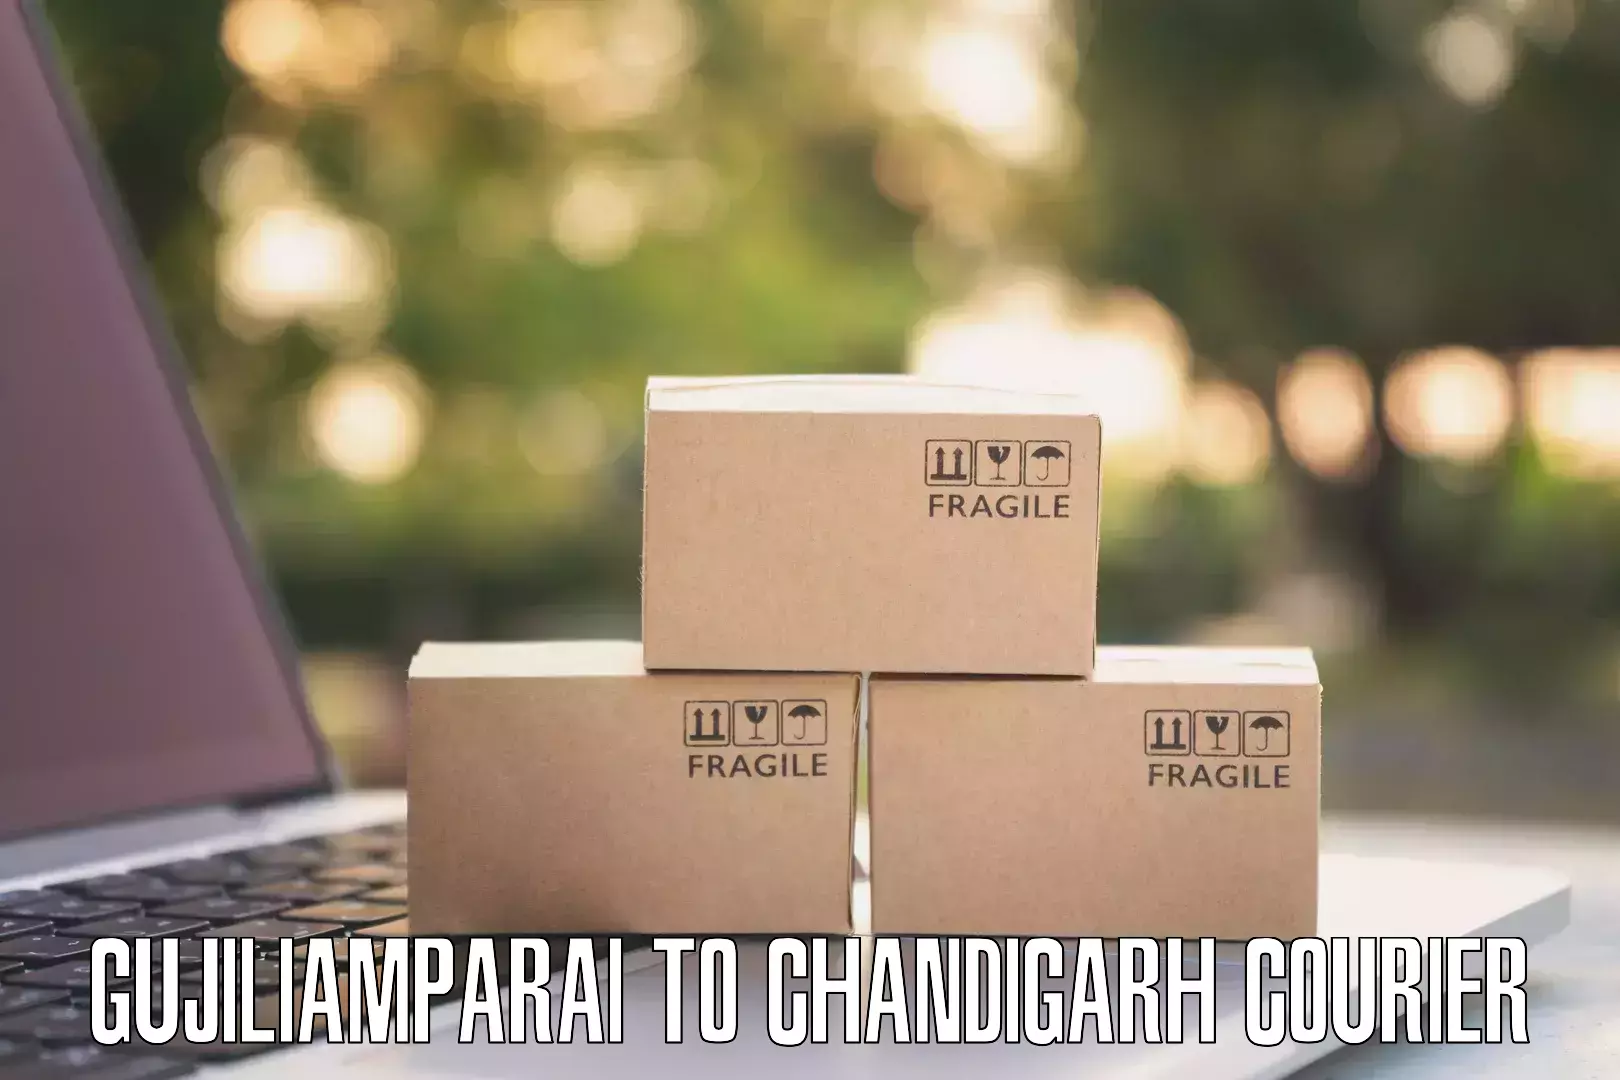 Same-day delivery solutions Gujiliamparai to Chandigarh